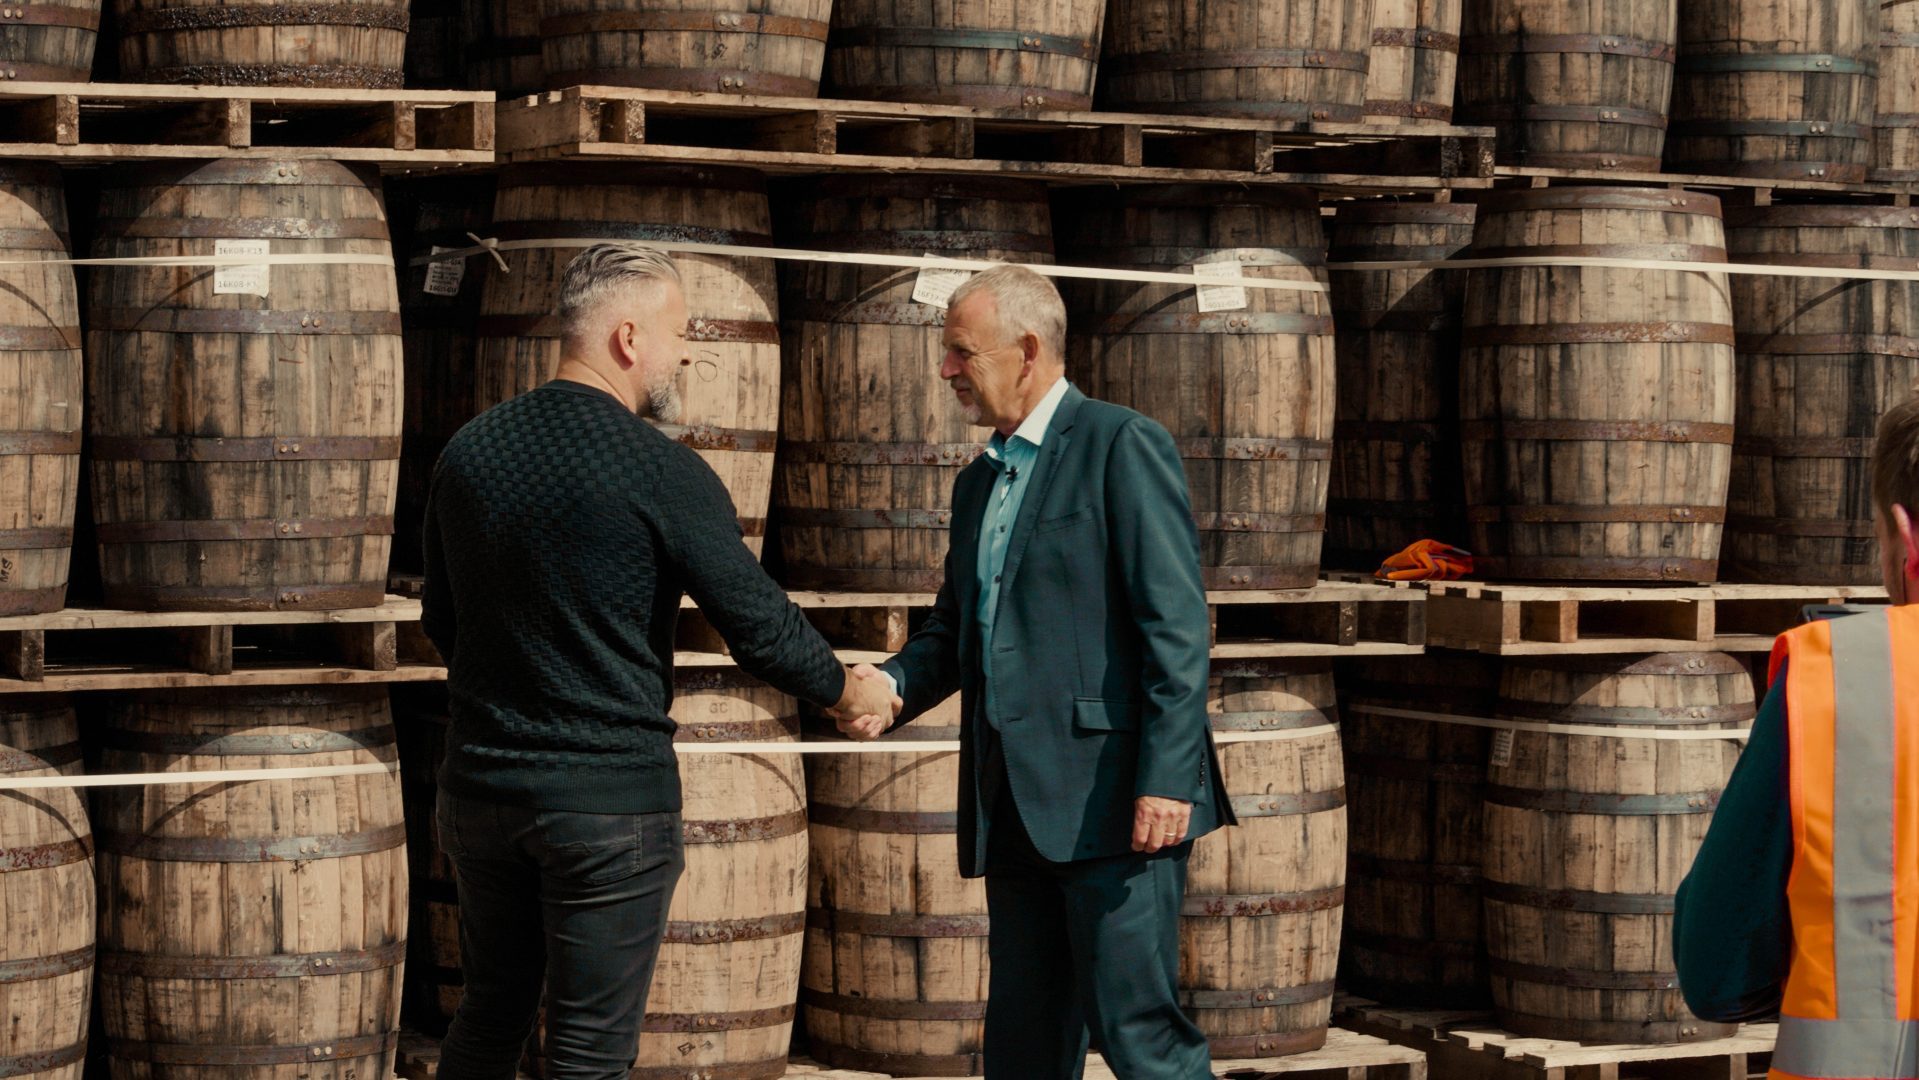 Jay Bradley and a whiskey aficionado shaking hands on a whiskey cask investment deal